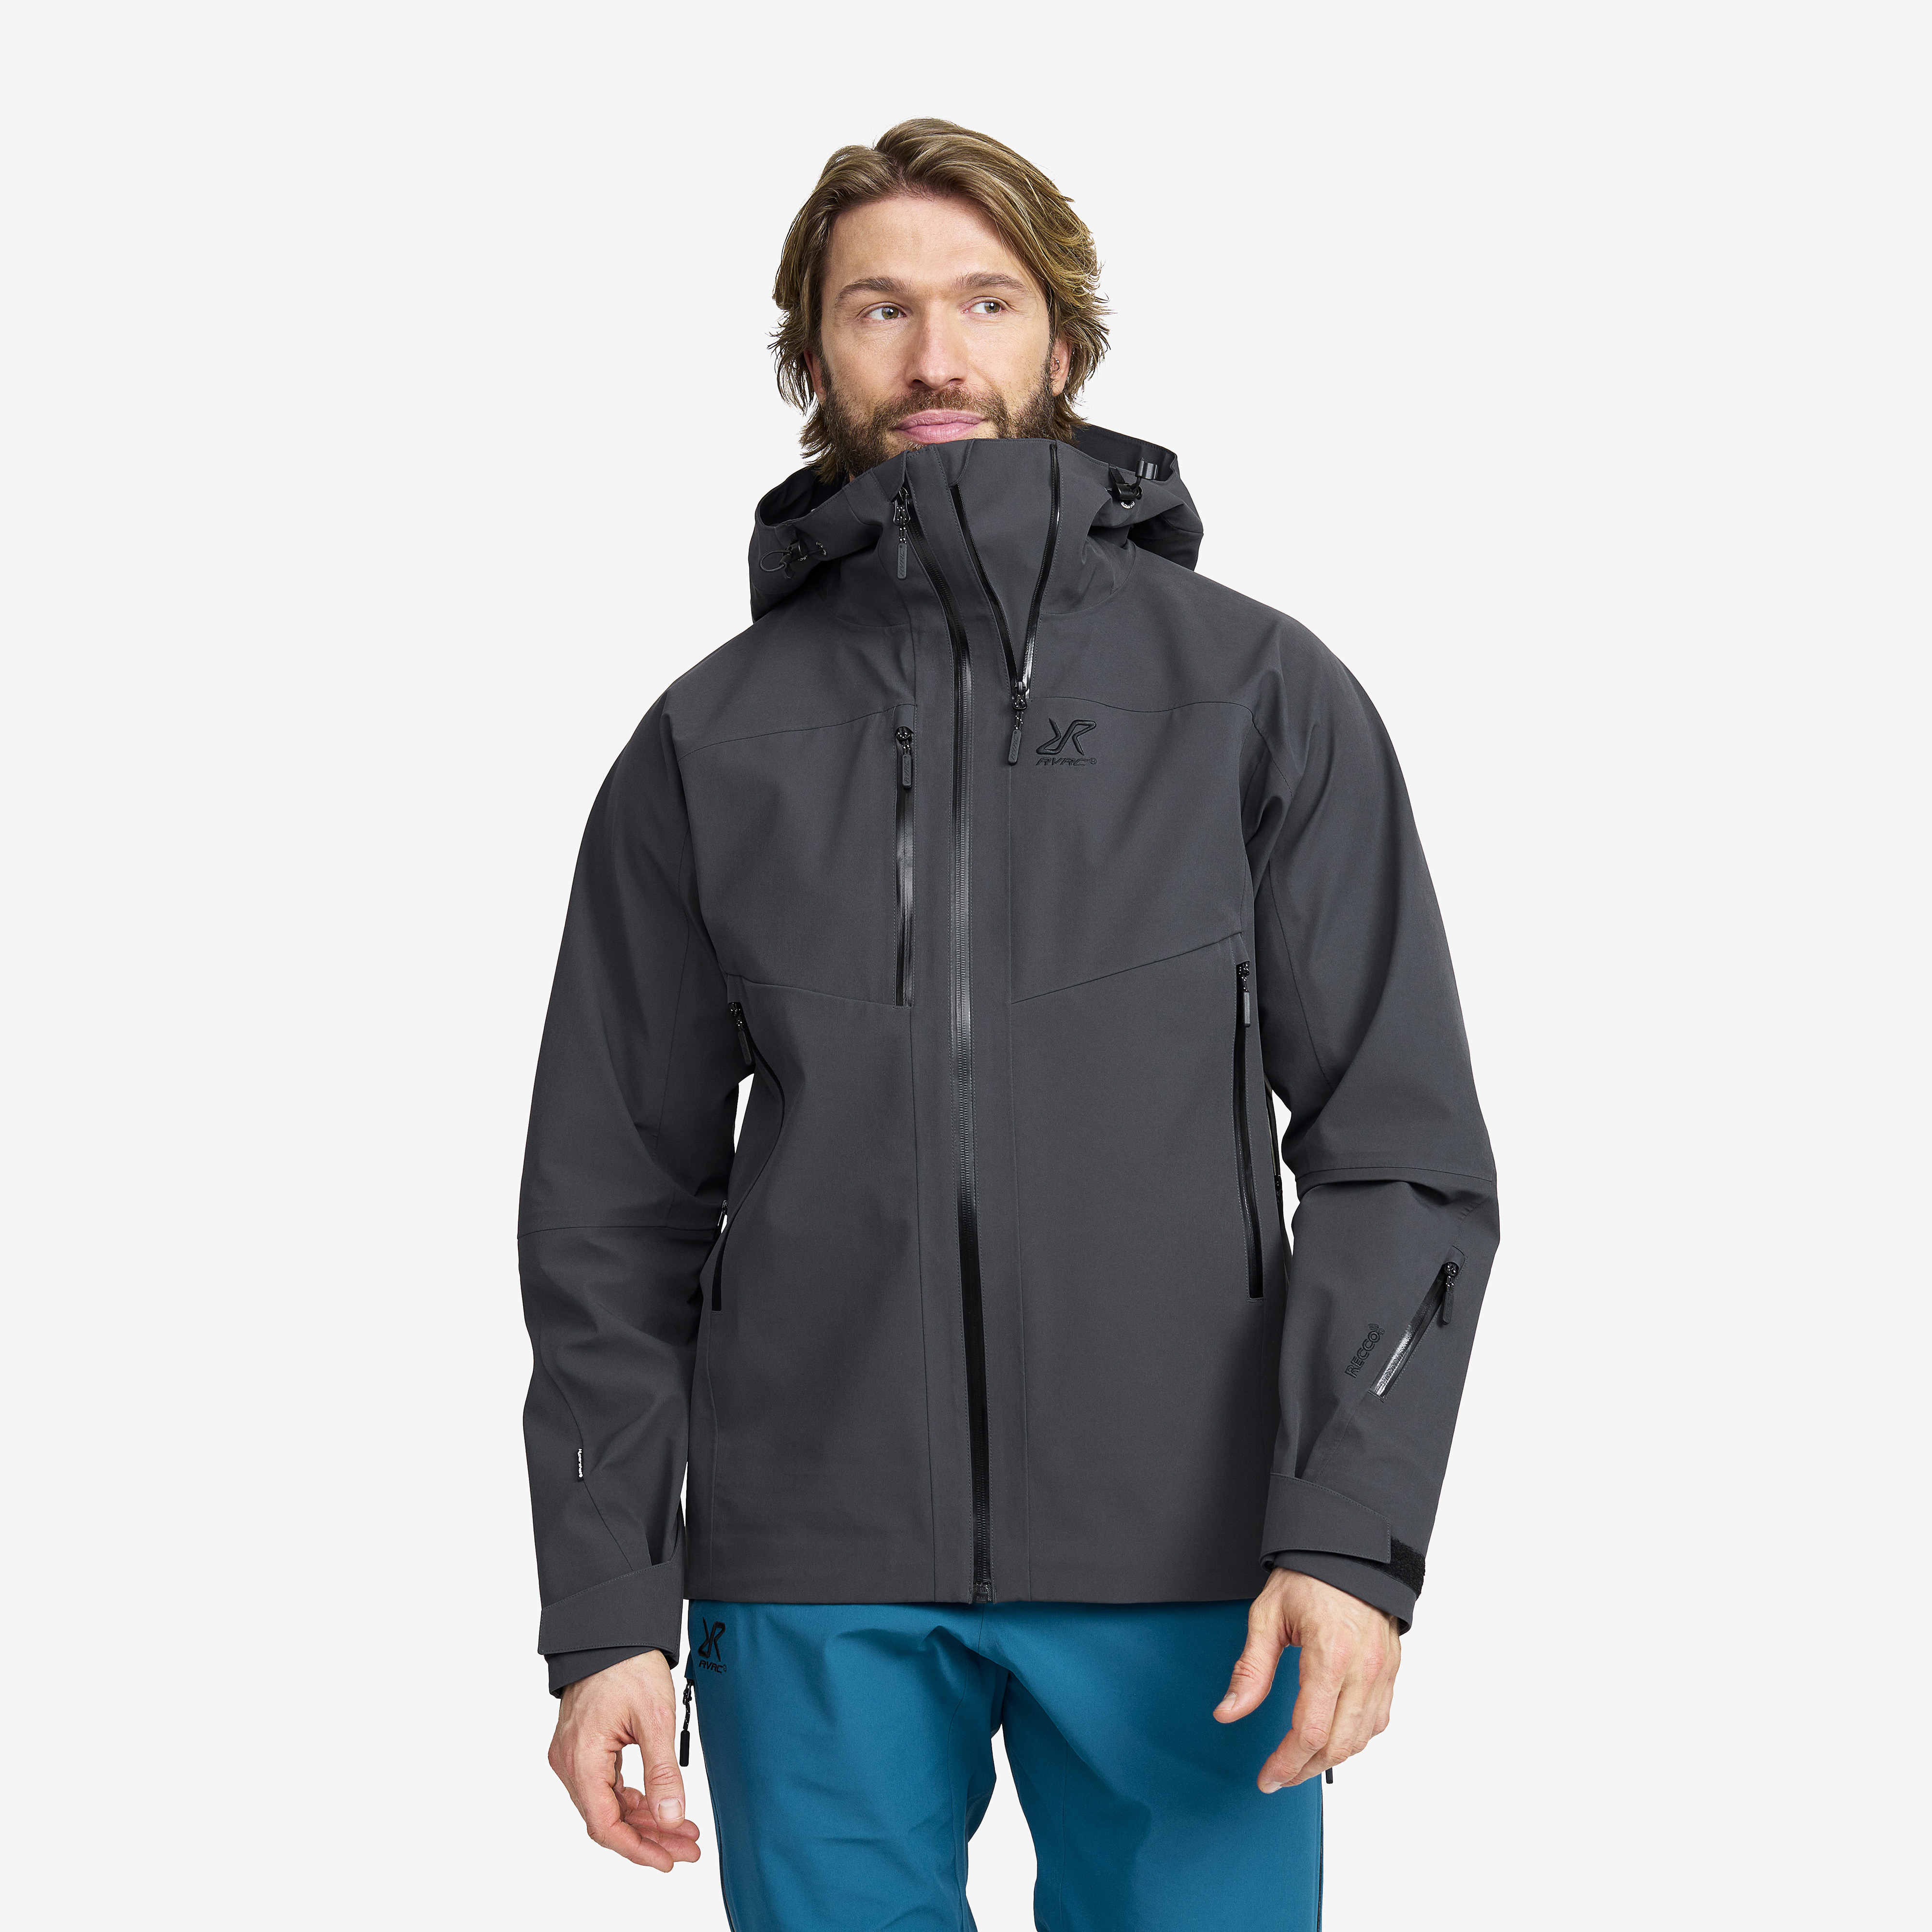 Cyclone 3L Shell Jacket Anthracite Miehet